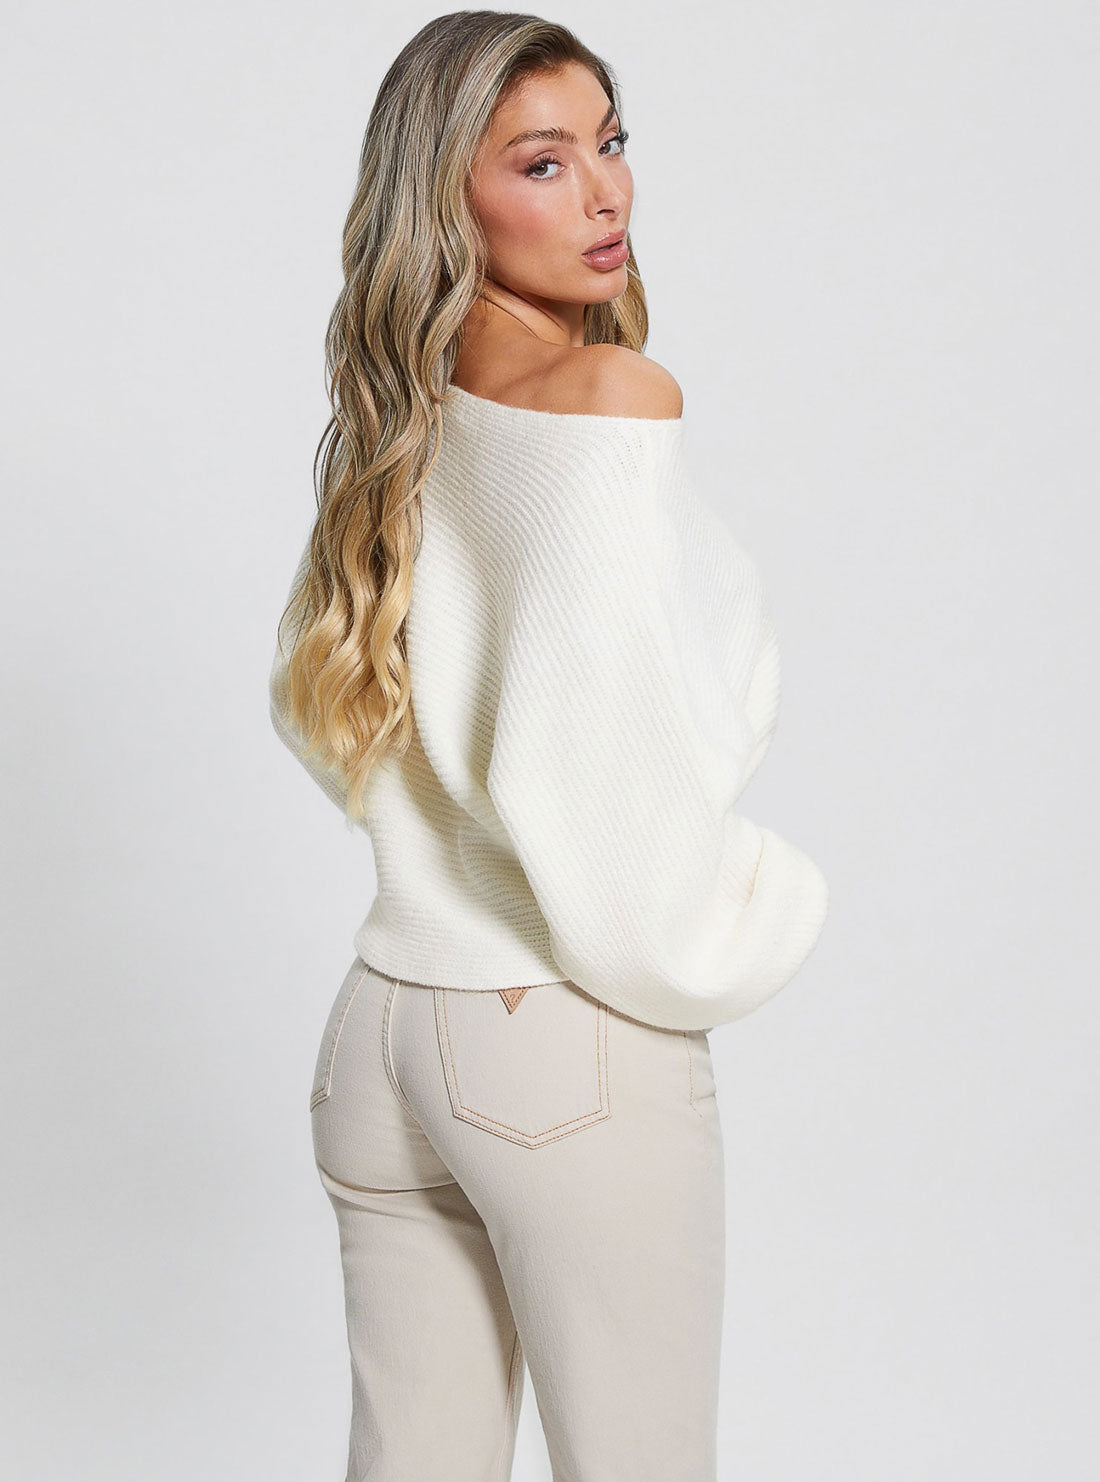 White Isadora Off-Shoulder Knit Top | GUESS Women's Apparel | back view